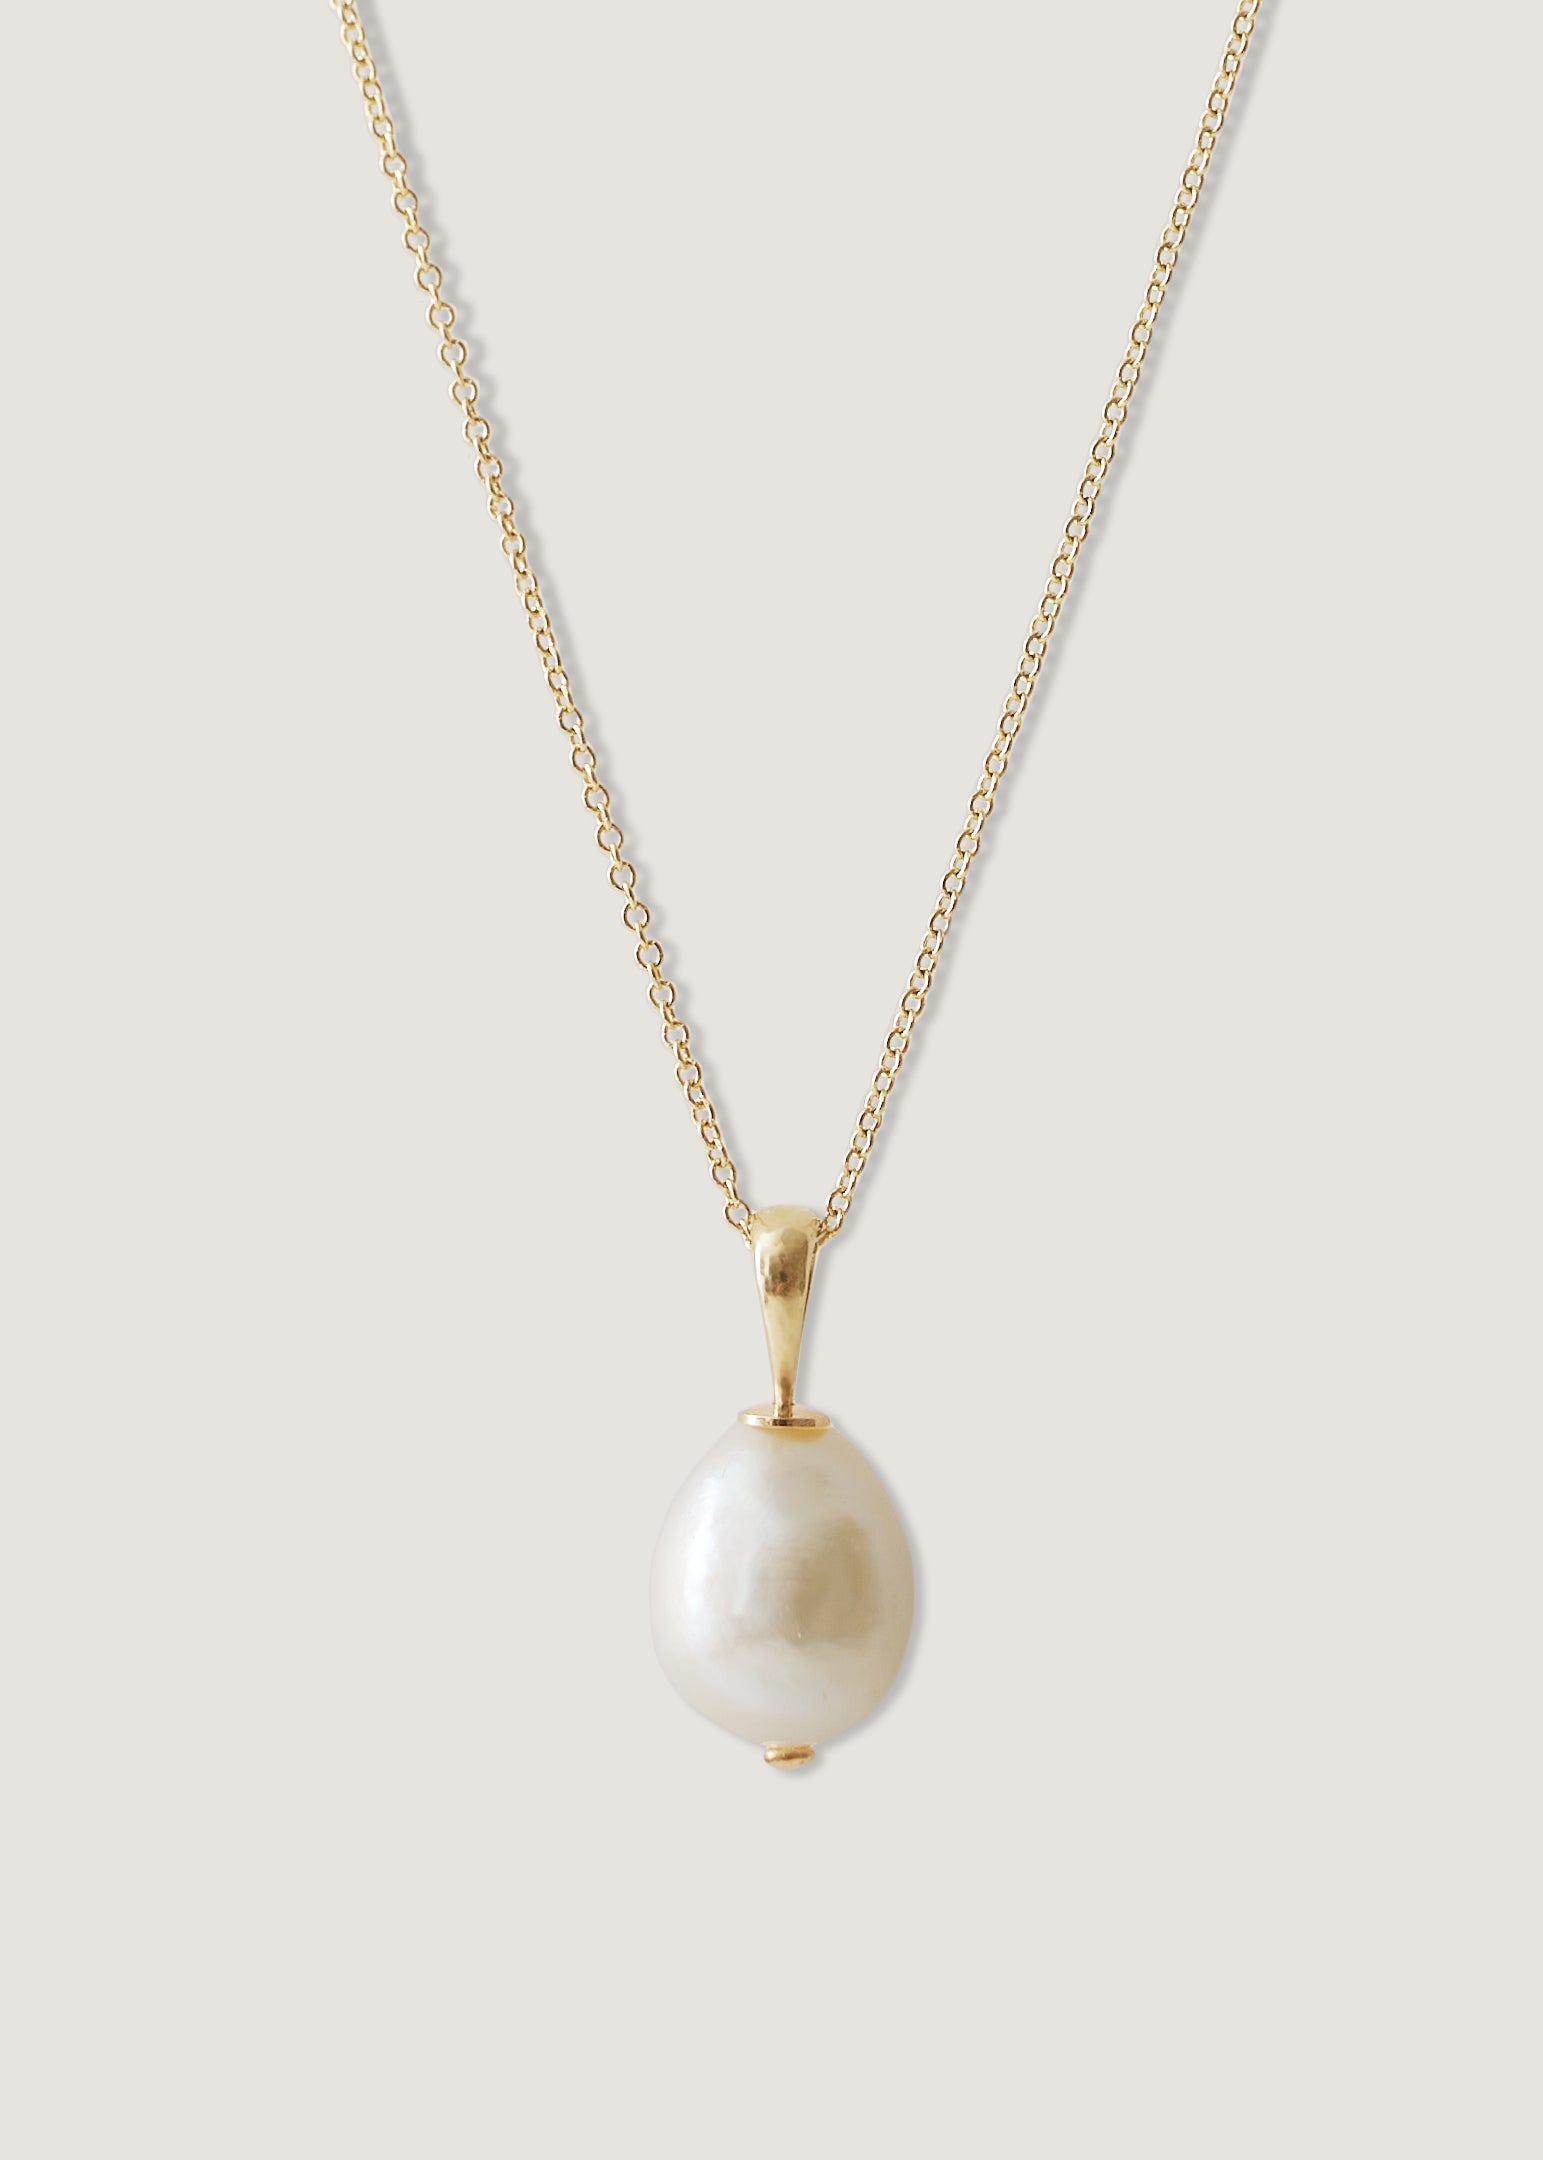 TEARDROP FRESHWATER PEARL NECKLACE- Sterling Silver - The Littl A$99.99  A$149.99 30off Bridal (Jewellery Only) Chain Necklace